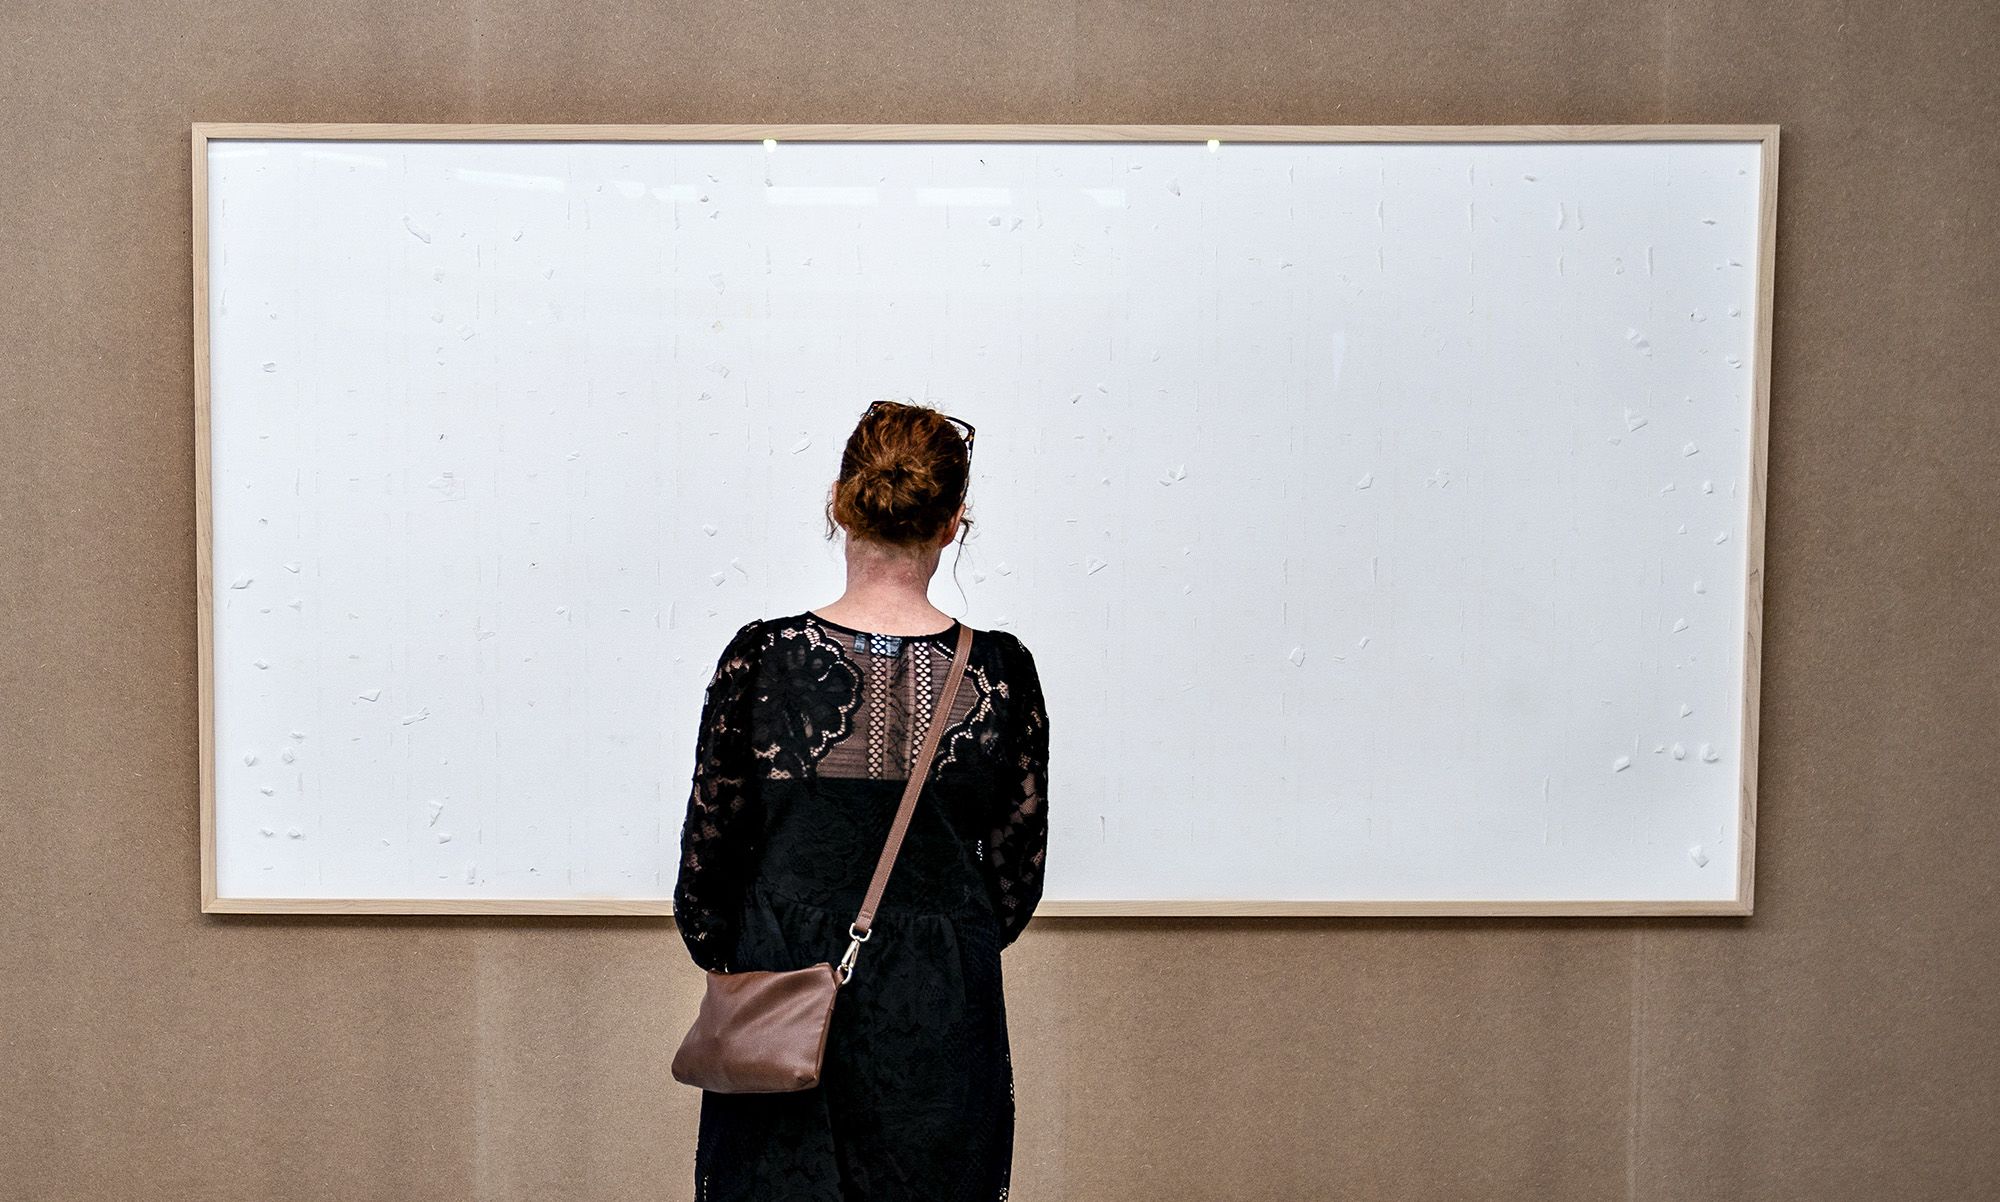 A woman stands in front of an empty frame hung up at the Kunsten Museum in Aalborg, Denmark, on September 28 2021. - The Danish museum loaned an artist $84,000 in cash to recreate old artworks of his using the banknotes, but the boxes he sent only contained blank canvasses and a new title: "Take the Money and Run". Danish artist Jens Haaning had done just that, pocketing the money the Kunsten Museum in the western city of Aalborg had loaned him to reproduce two works that used Danish kroner and euros to represent the annual salary in Denmark and Austria. - Denmark OUT / RESTRICTED TO EDITORIAL USE - MANDATORY MENTION OF THE ARTIST UPON PUBLICATION - TO ILLUSTRATE THE EVENT AS SPECIFIED IN THE CAPTION (Photo by Henning Bagger / Ritzau Scanpix / AFP) / Denmark OUT / RESTRICTED TO EDITORIAL USE - MANDATORY MENTION OF THE ARTIST UPON PUBLICATION - TO ILLUSTRATE THE EVENT AS SPECIFIED IN THE CAPTION / Denmark OUT / RESTRICTED TO EDITORIAL USE - MANDATORY MENTION OF THE ARTIST UPON PUBLICATION - TO ILLUSTRATE THE EVENT AS SPECIFIED IN THE CAPTION (Photo by HENNING BAGGER/Ritzau Scanpix/AFP via Getty Images)